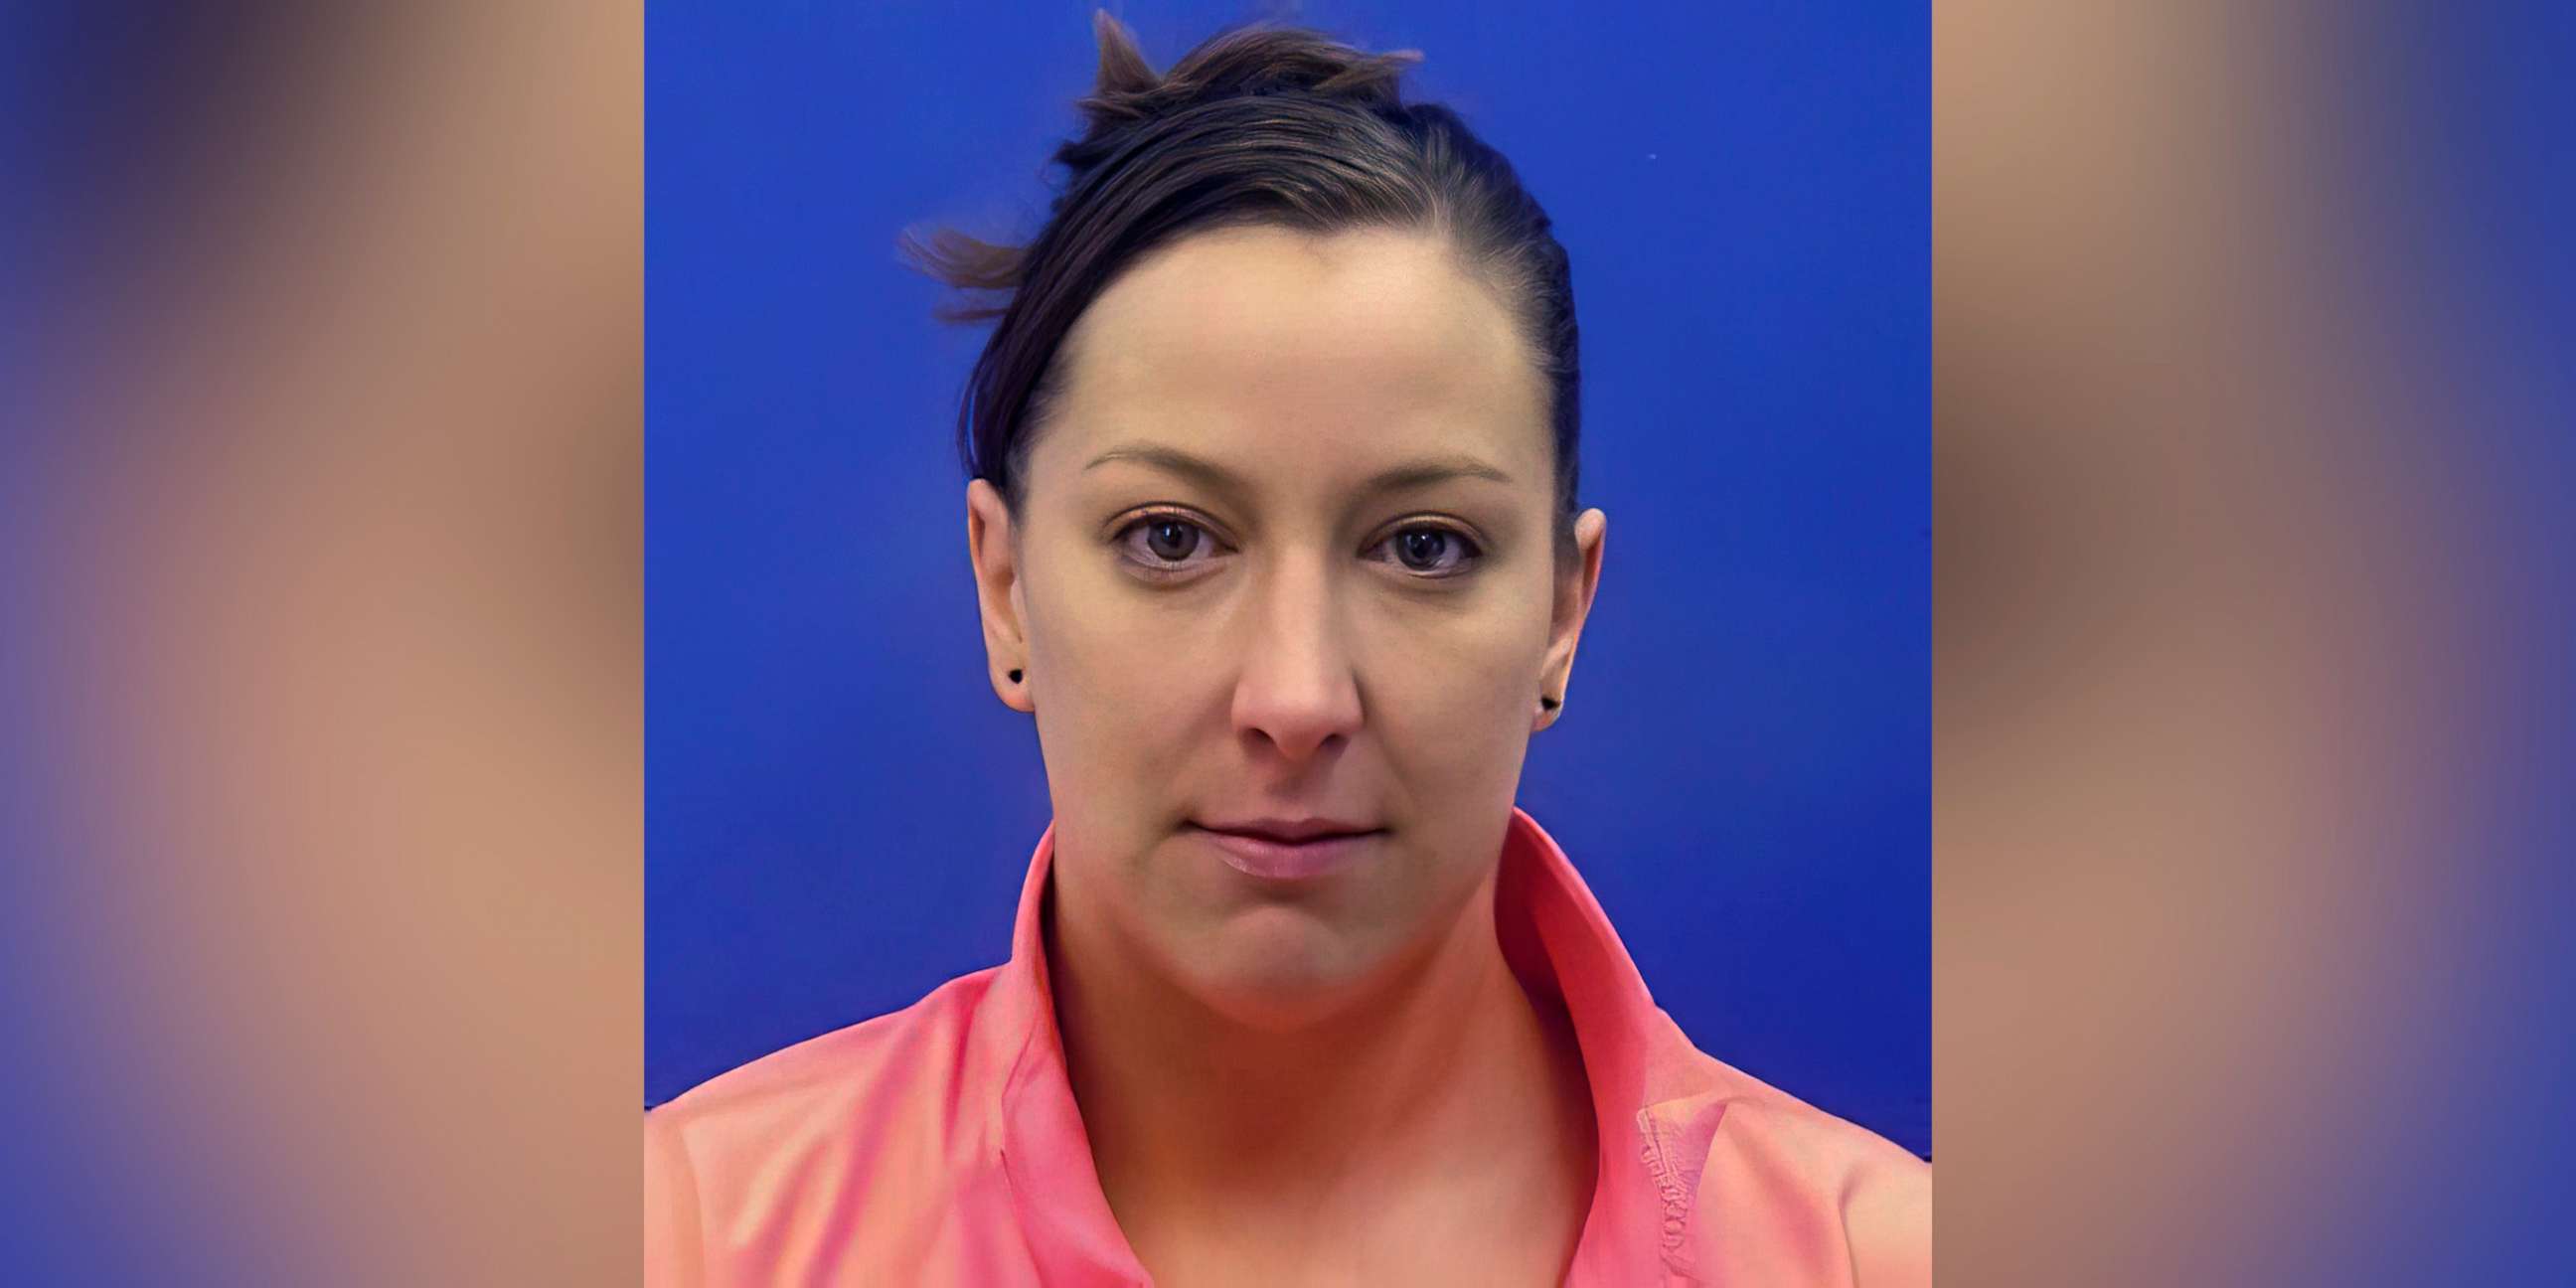 PHOTO: Ashli Babbitt in a driver's license photo from the Maryland Motor Vehicle Administration (MVA).